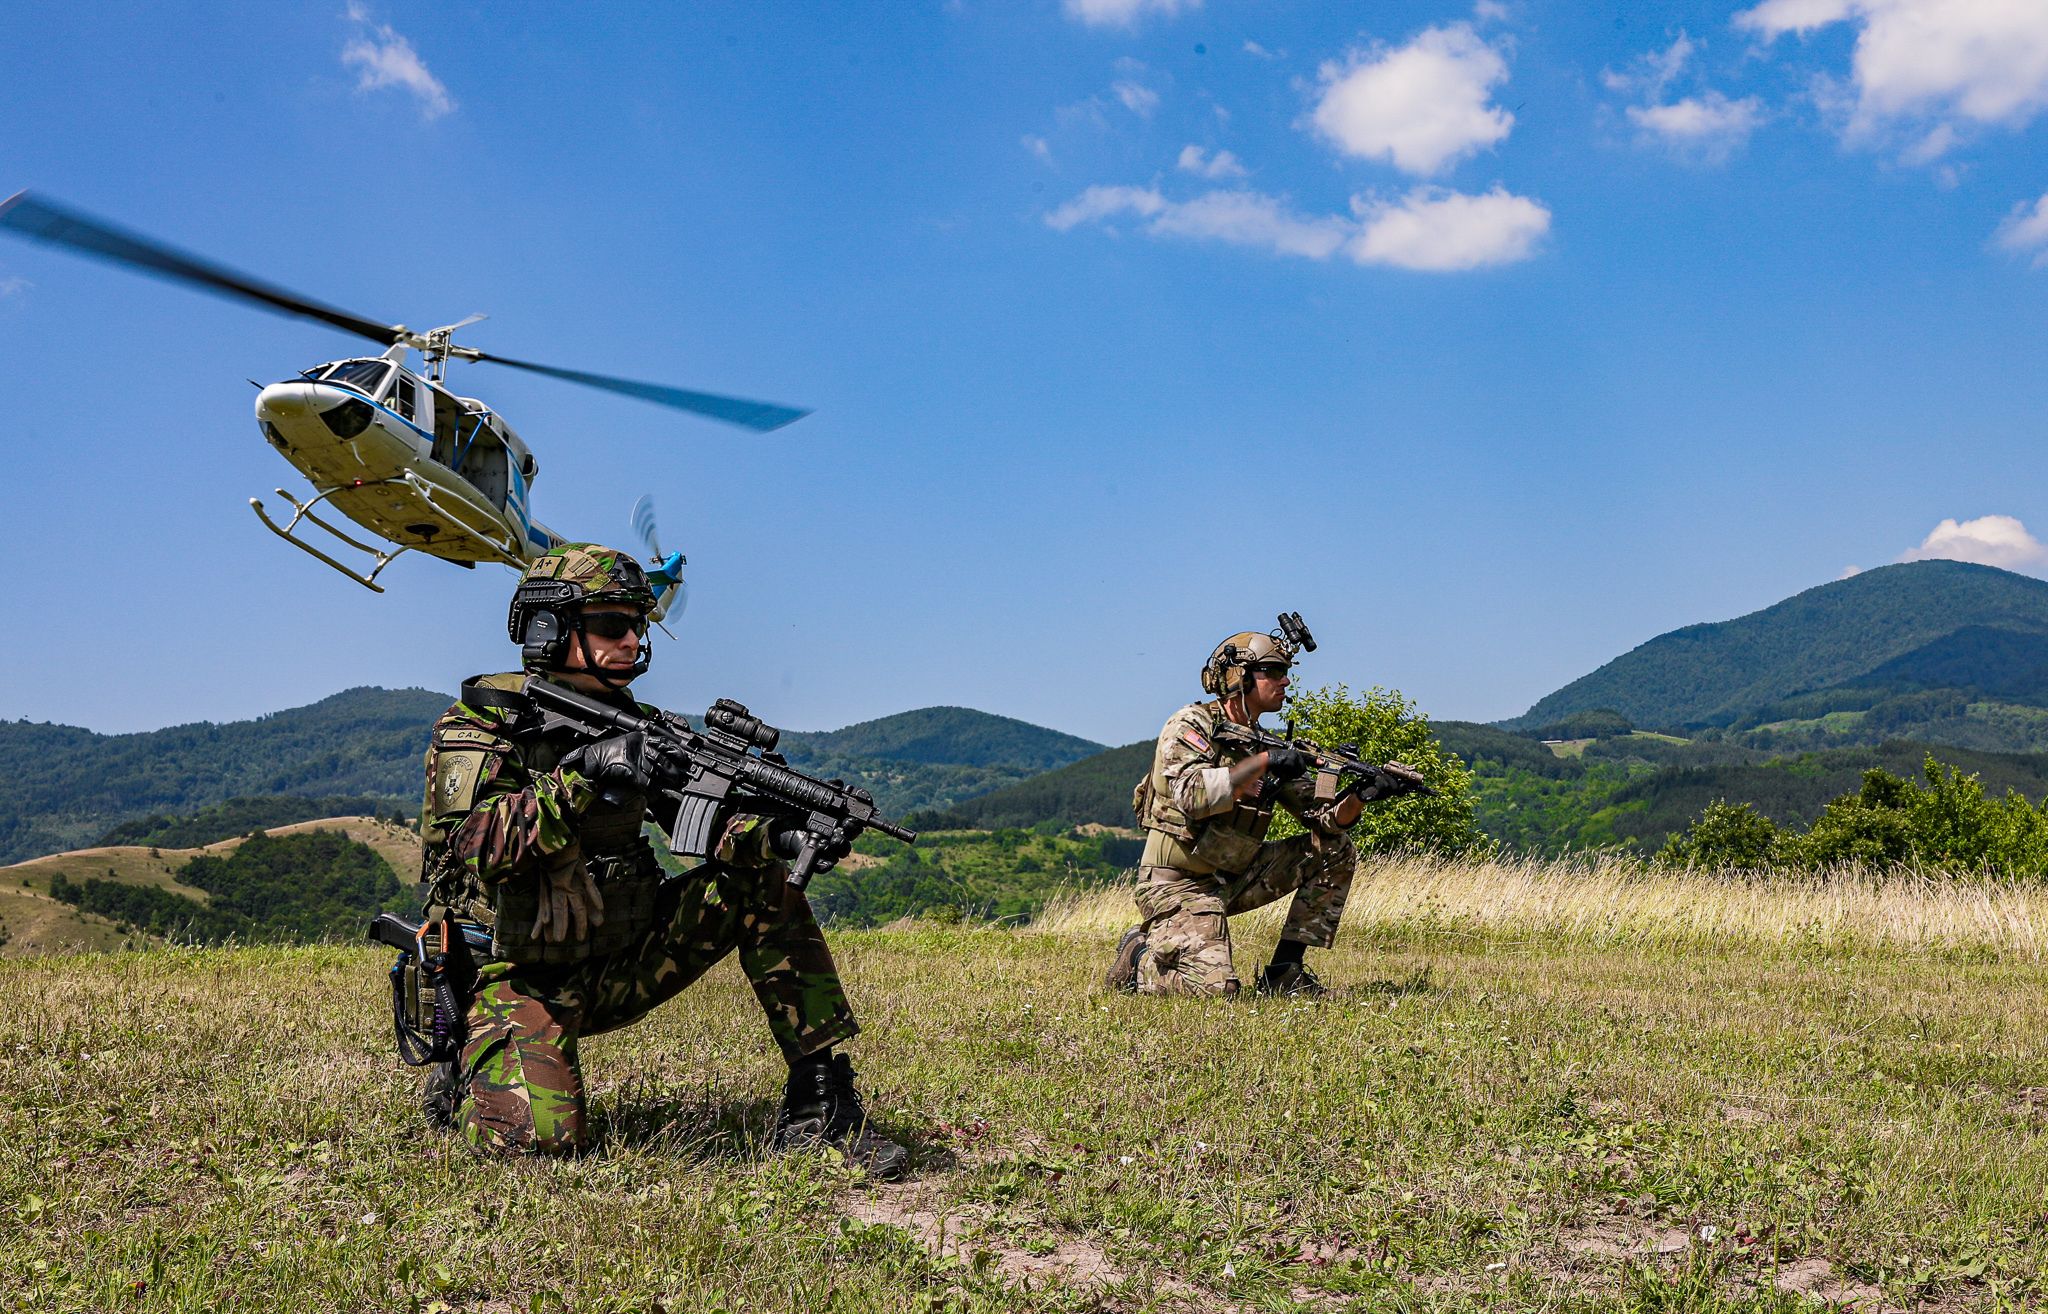 Serbian Police from the Special Anti-terrorist Unit (SAJ) and U.S. Army Green Berets conducted a Joint Combined Exchange Training in Goč, Serbia, June 28 - July 9 2021. The JCET aims to improve planning, maneuvering, and crisis response for Serbian and U.S. forces in mountainous terrain.